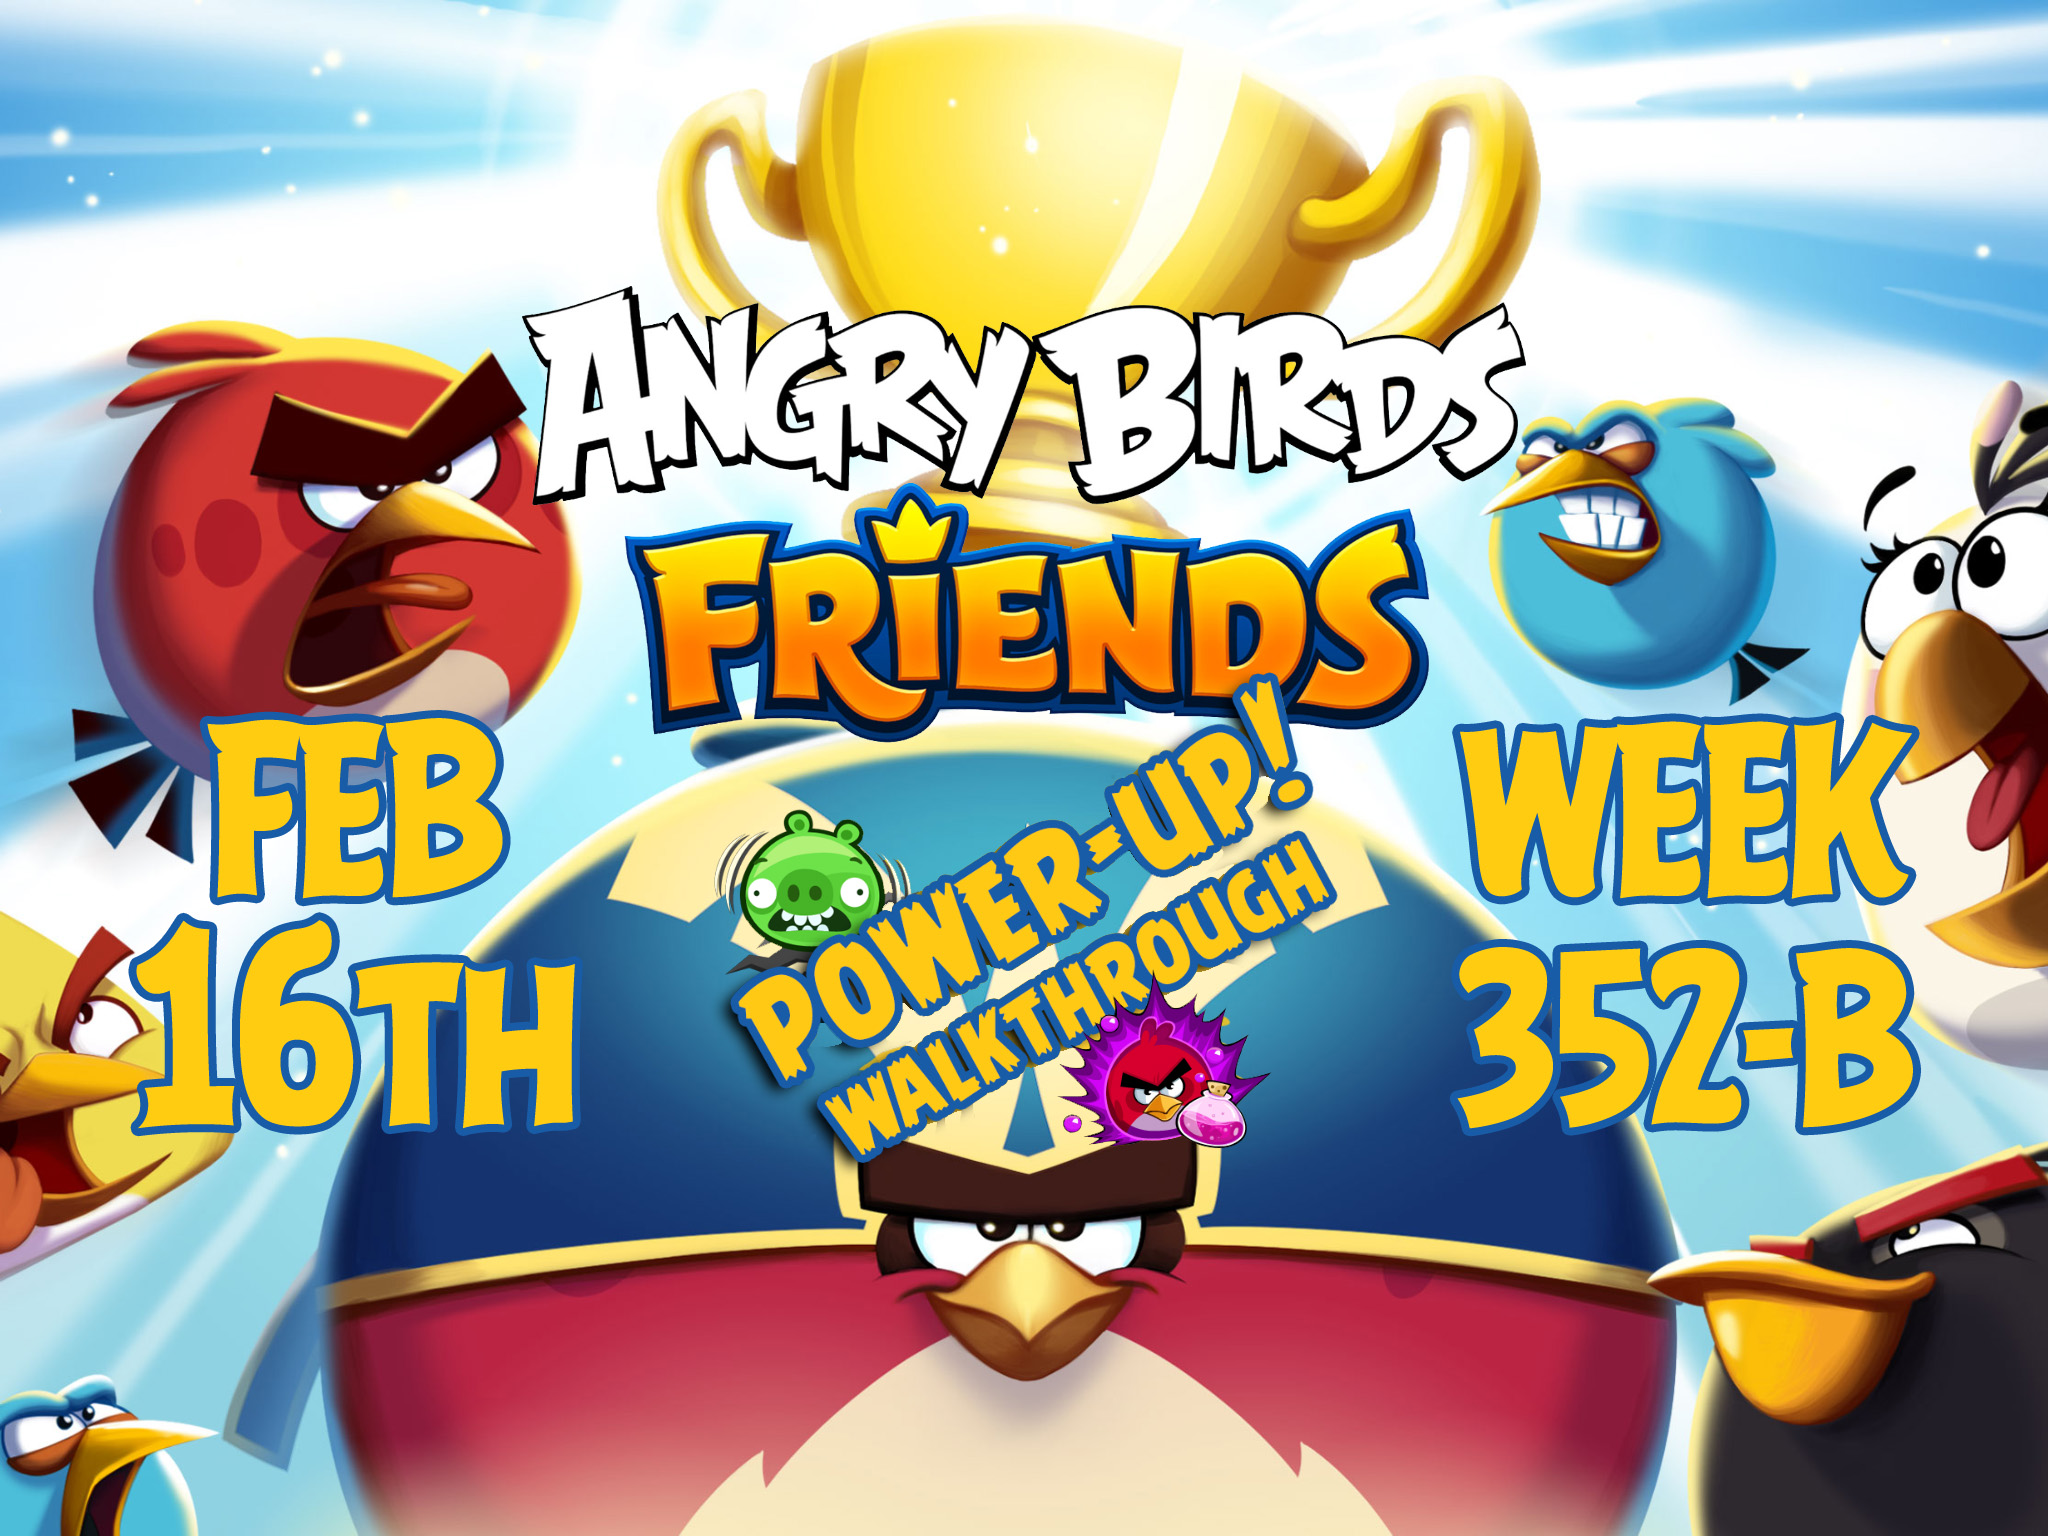 Angry-Birds-Friends-Tournament-Week-352-B-Feature-Image-PU